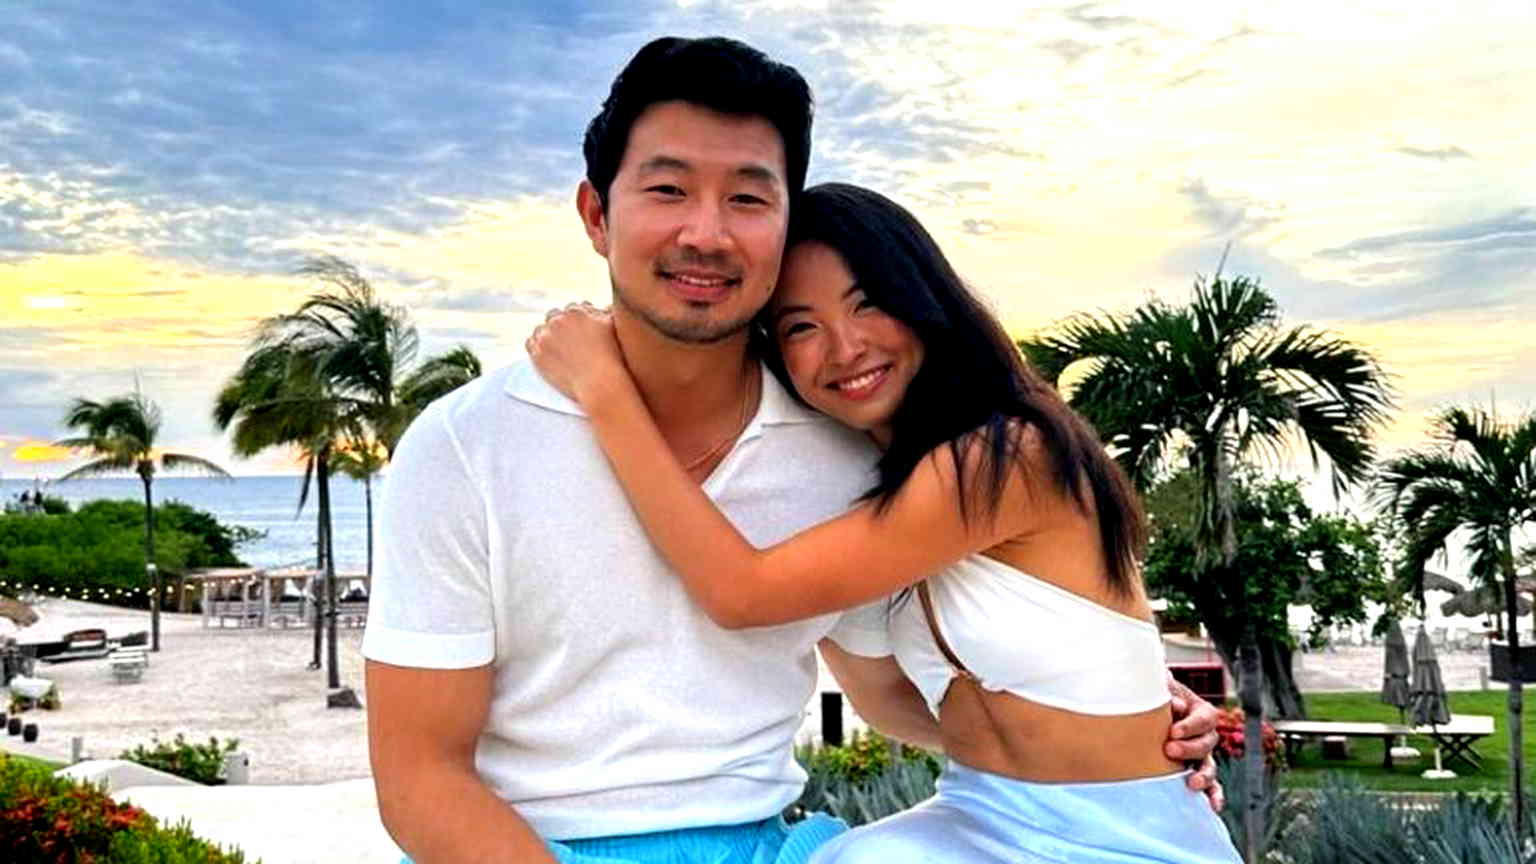 Simu Liu writes sweet message to girlfriend on her birthday: ‘Thanks for never giving up on me’